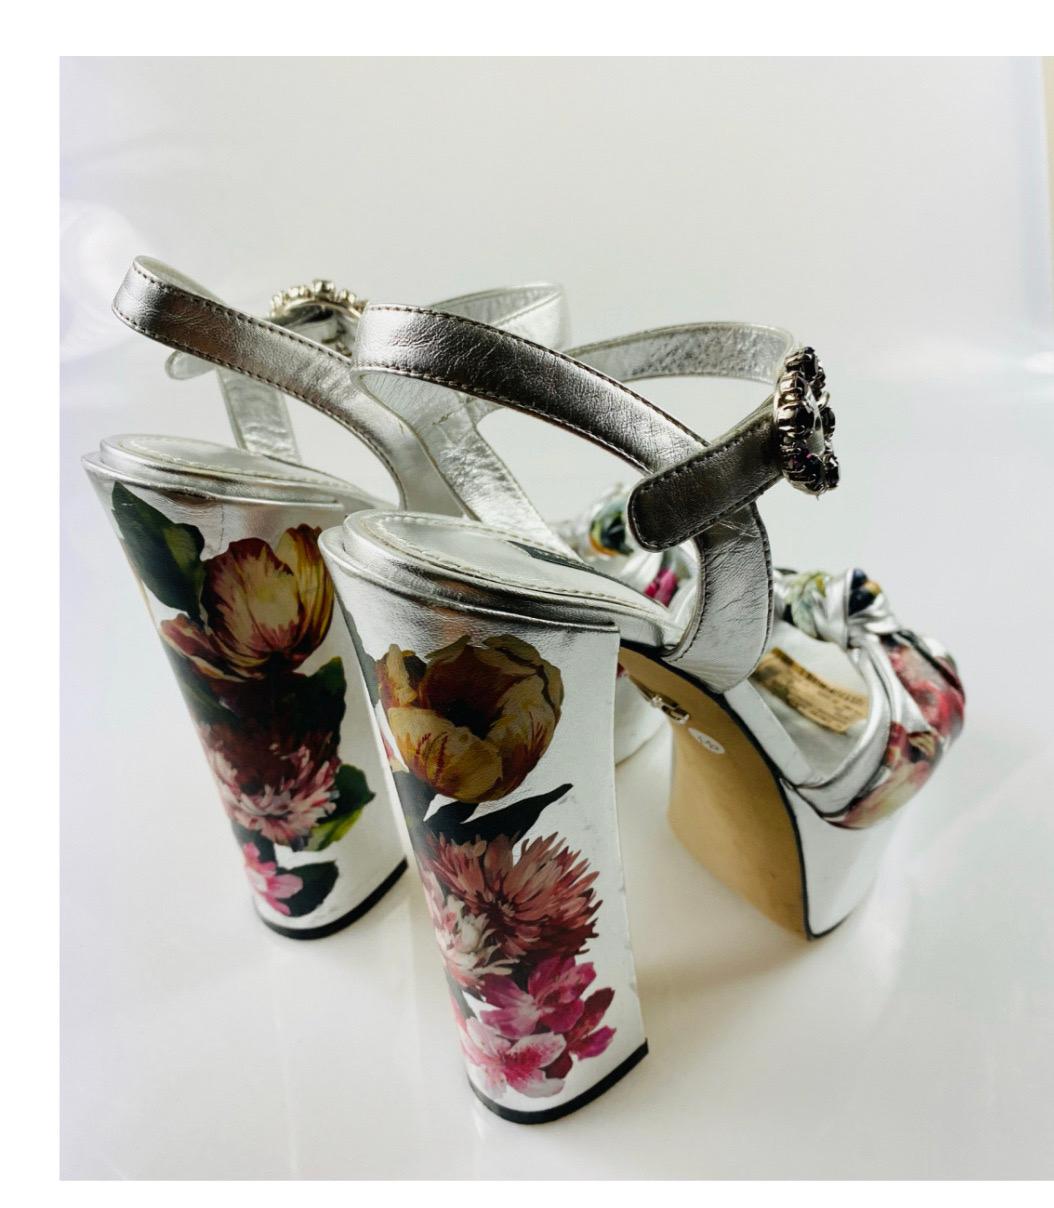 Dolce & Gabbana Cloth Floral wedge
sandals shoes heels

Size 38, UK5.
Have been worn and have signs
overall.

Come with the original box.

Please check my other DG clothing &

accessories! 
